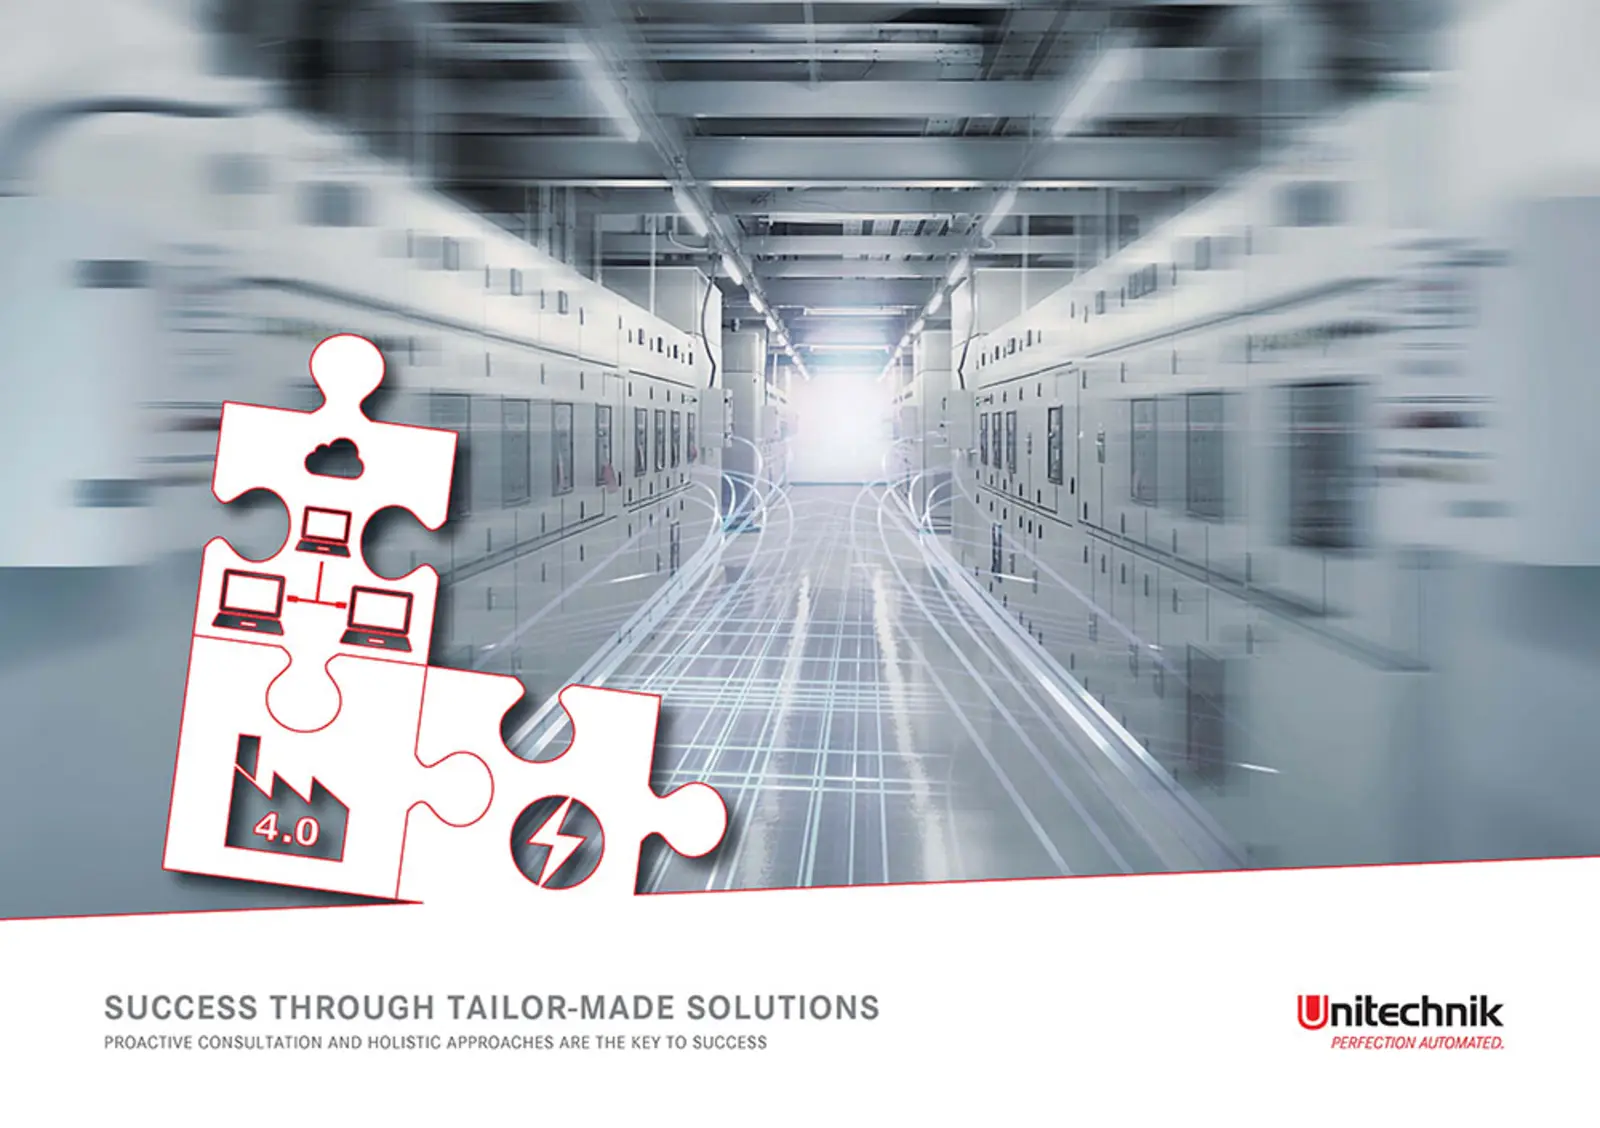 Success through tailor-made solutions